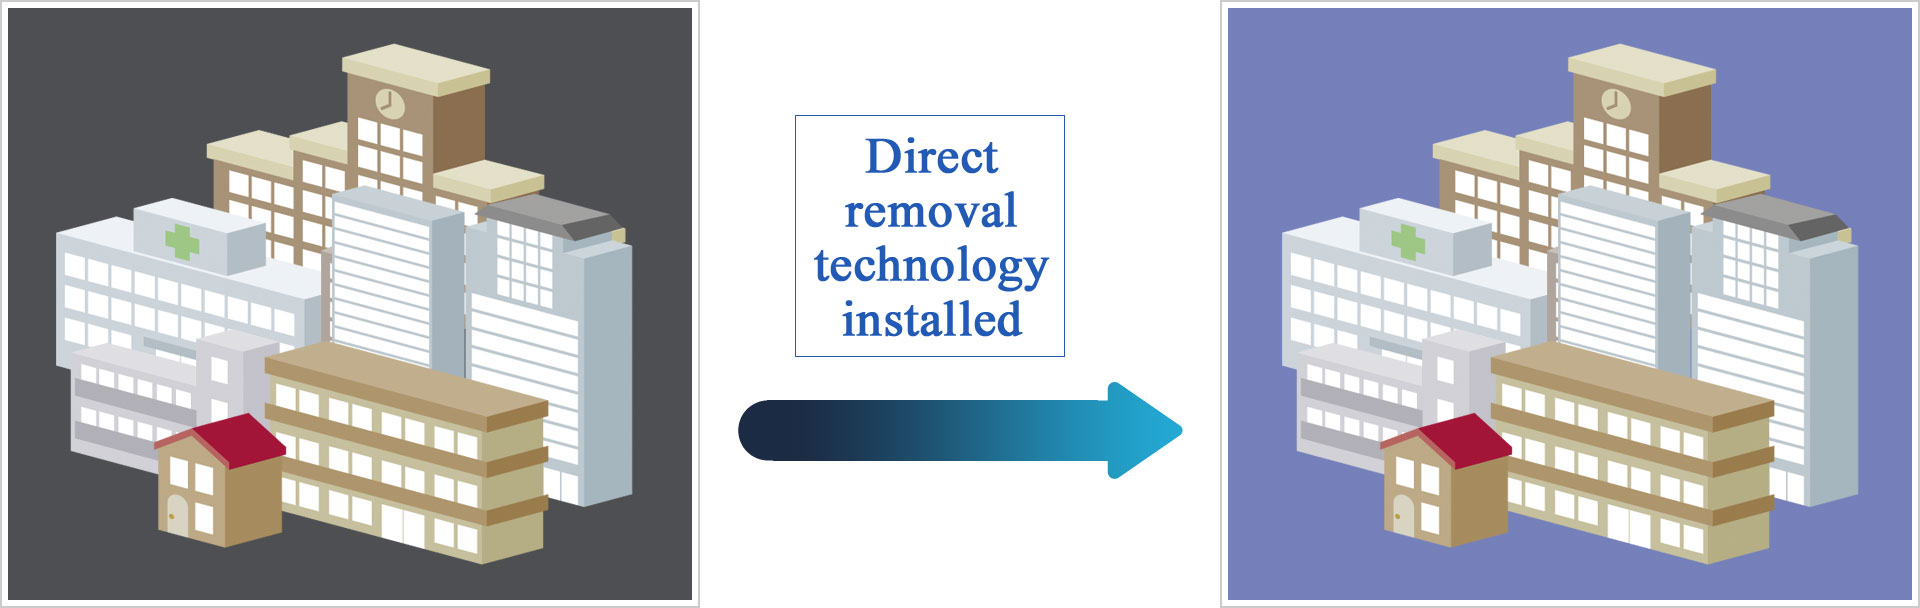 Direct removal technology installed